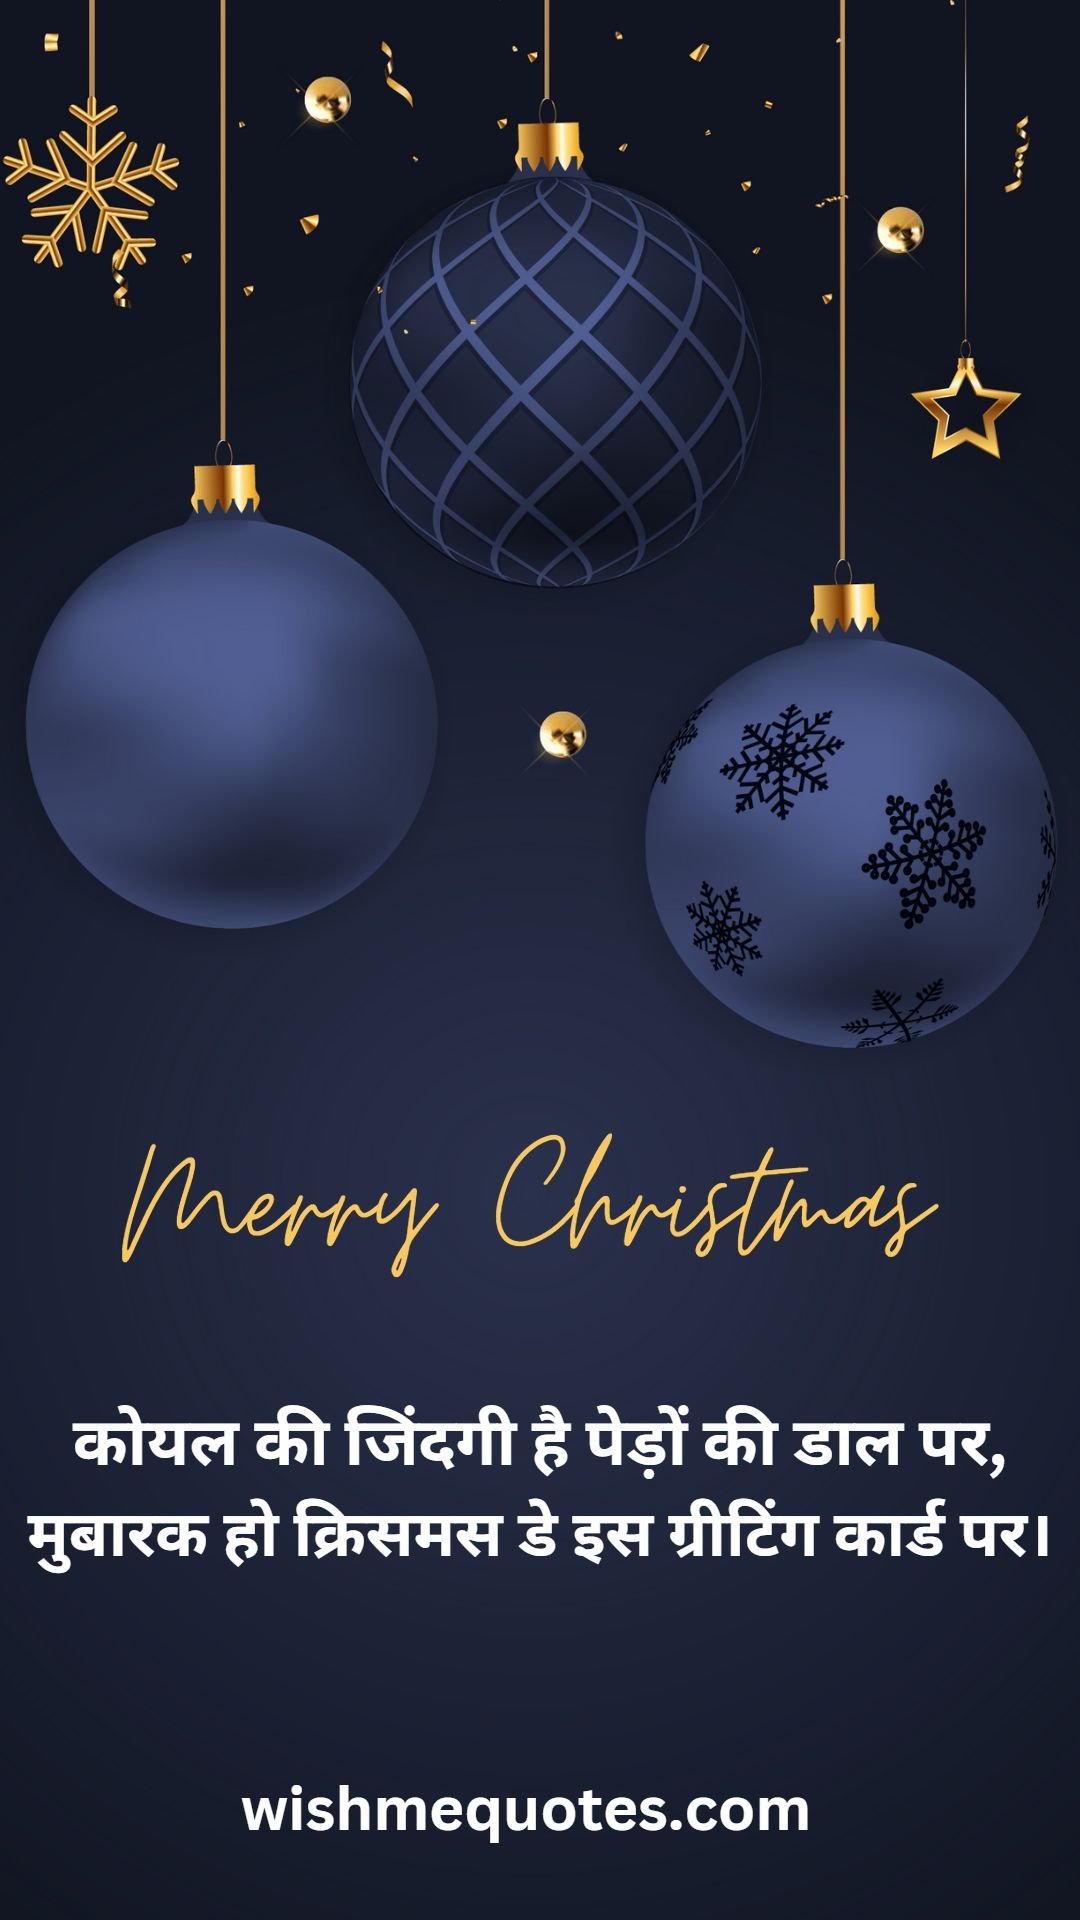 Christmas Day quotes images in Hindi